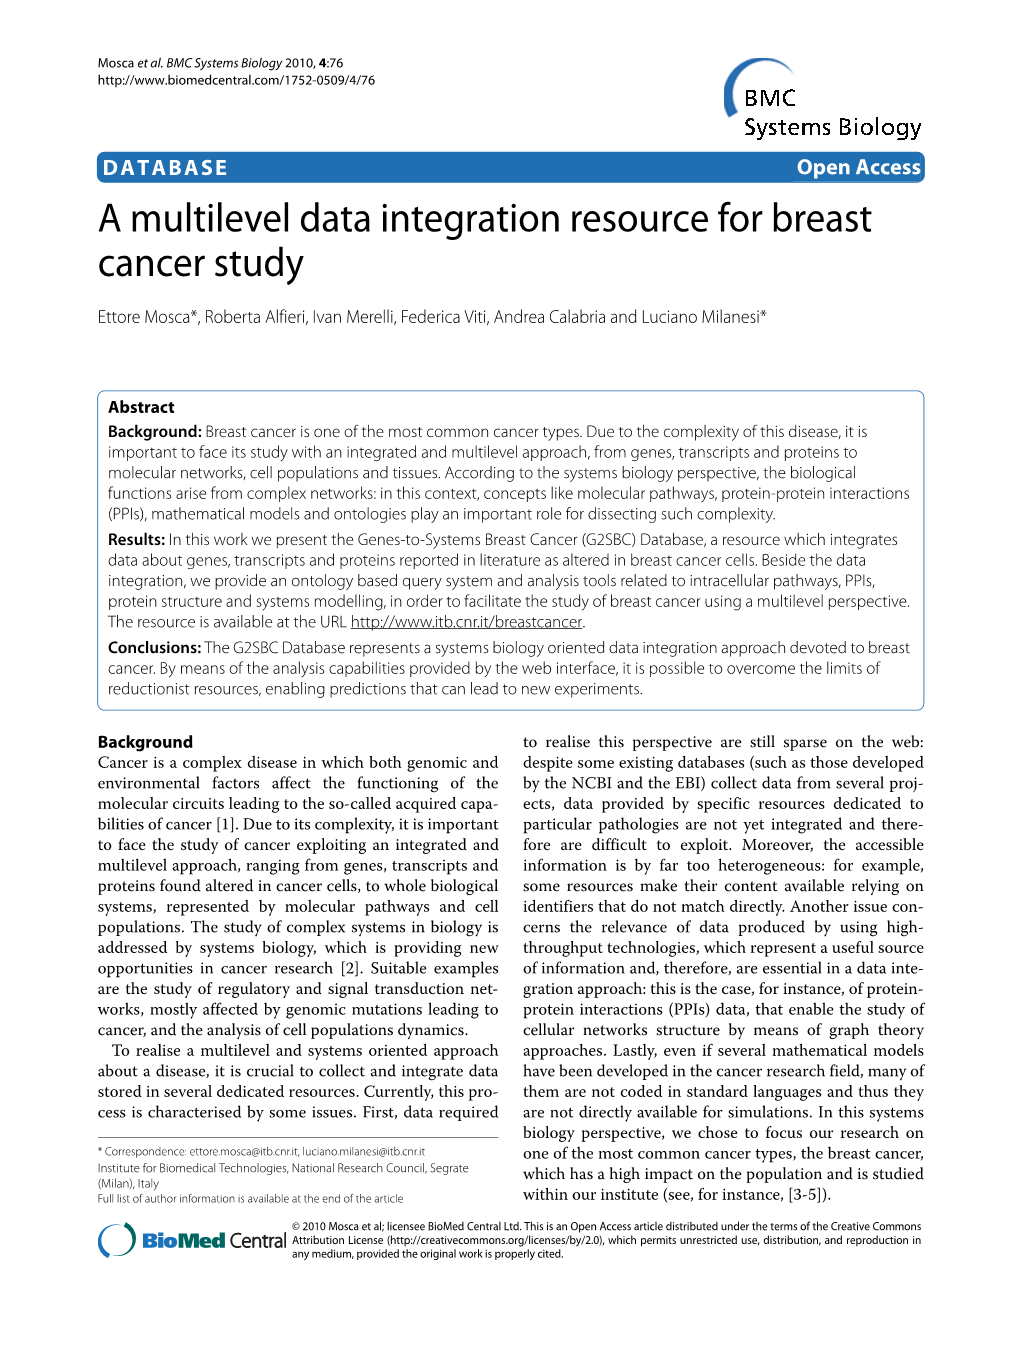 A Multilevel Data Integration Resource for Breast Cancer Study BMC Systems Biology 2010, 4:76